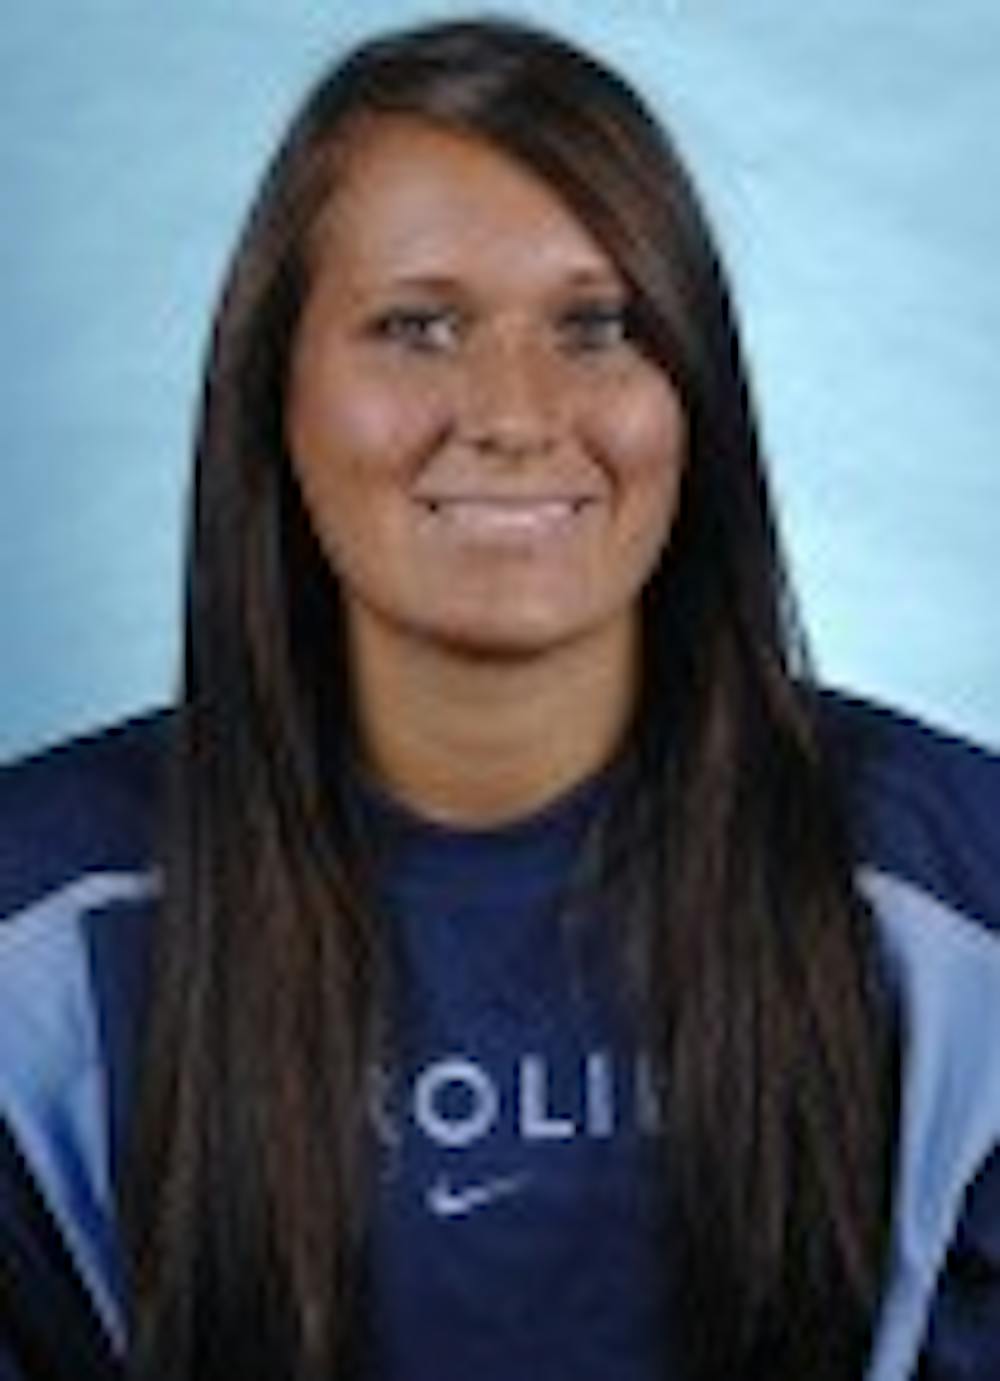 North Carolina ace Danielle Spaulding suffered a hand injury that shortened her playing time.